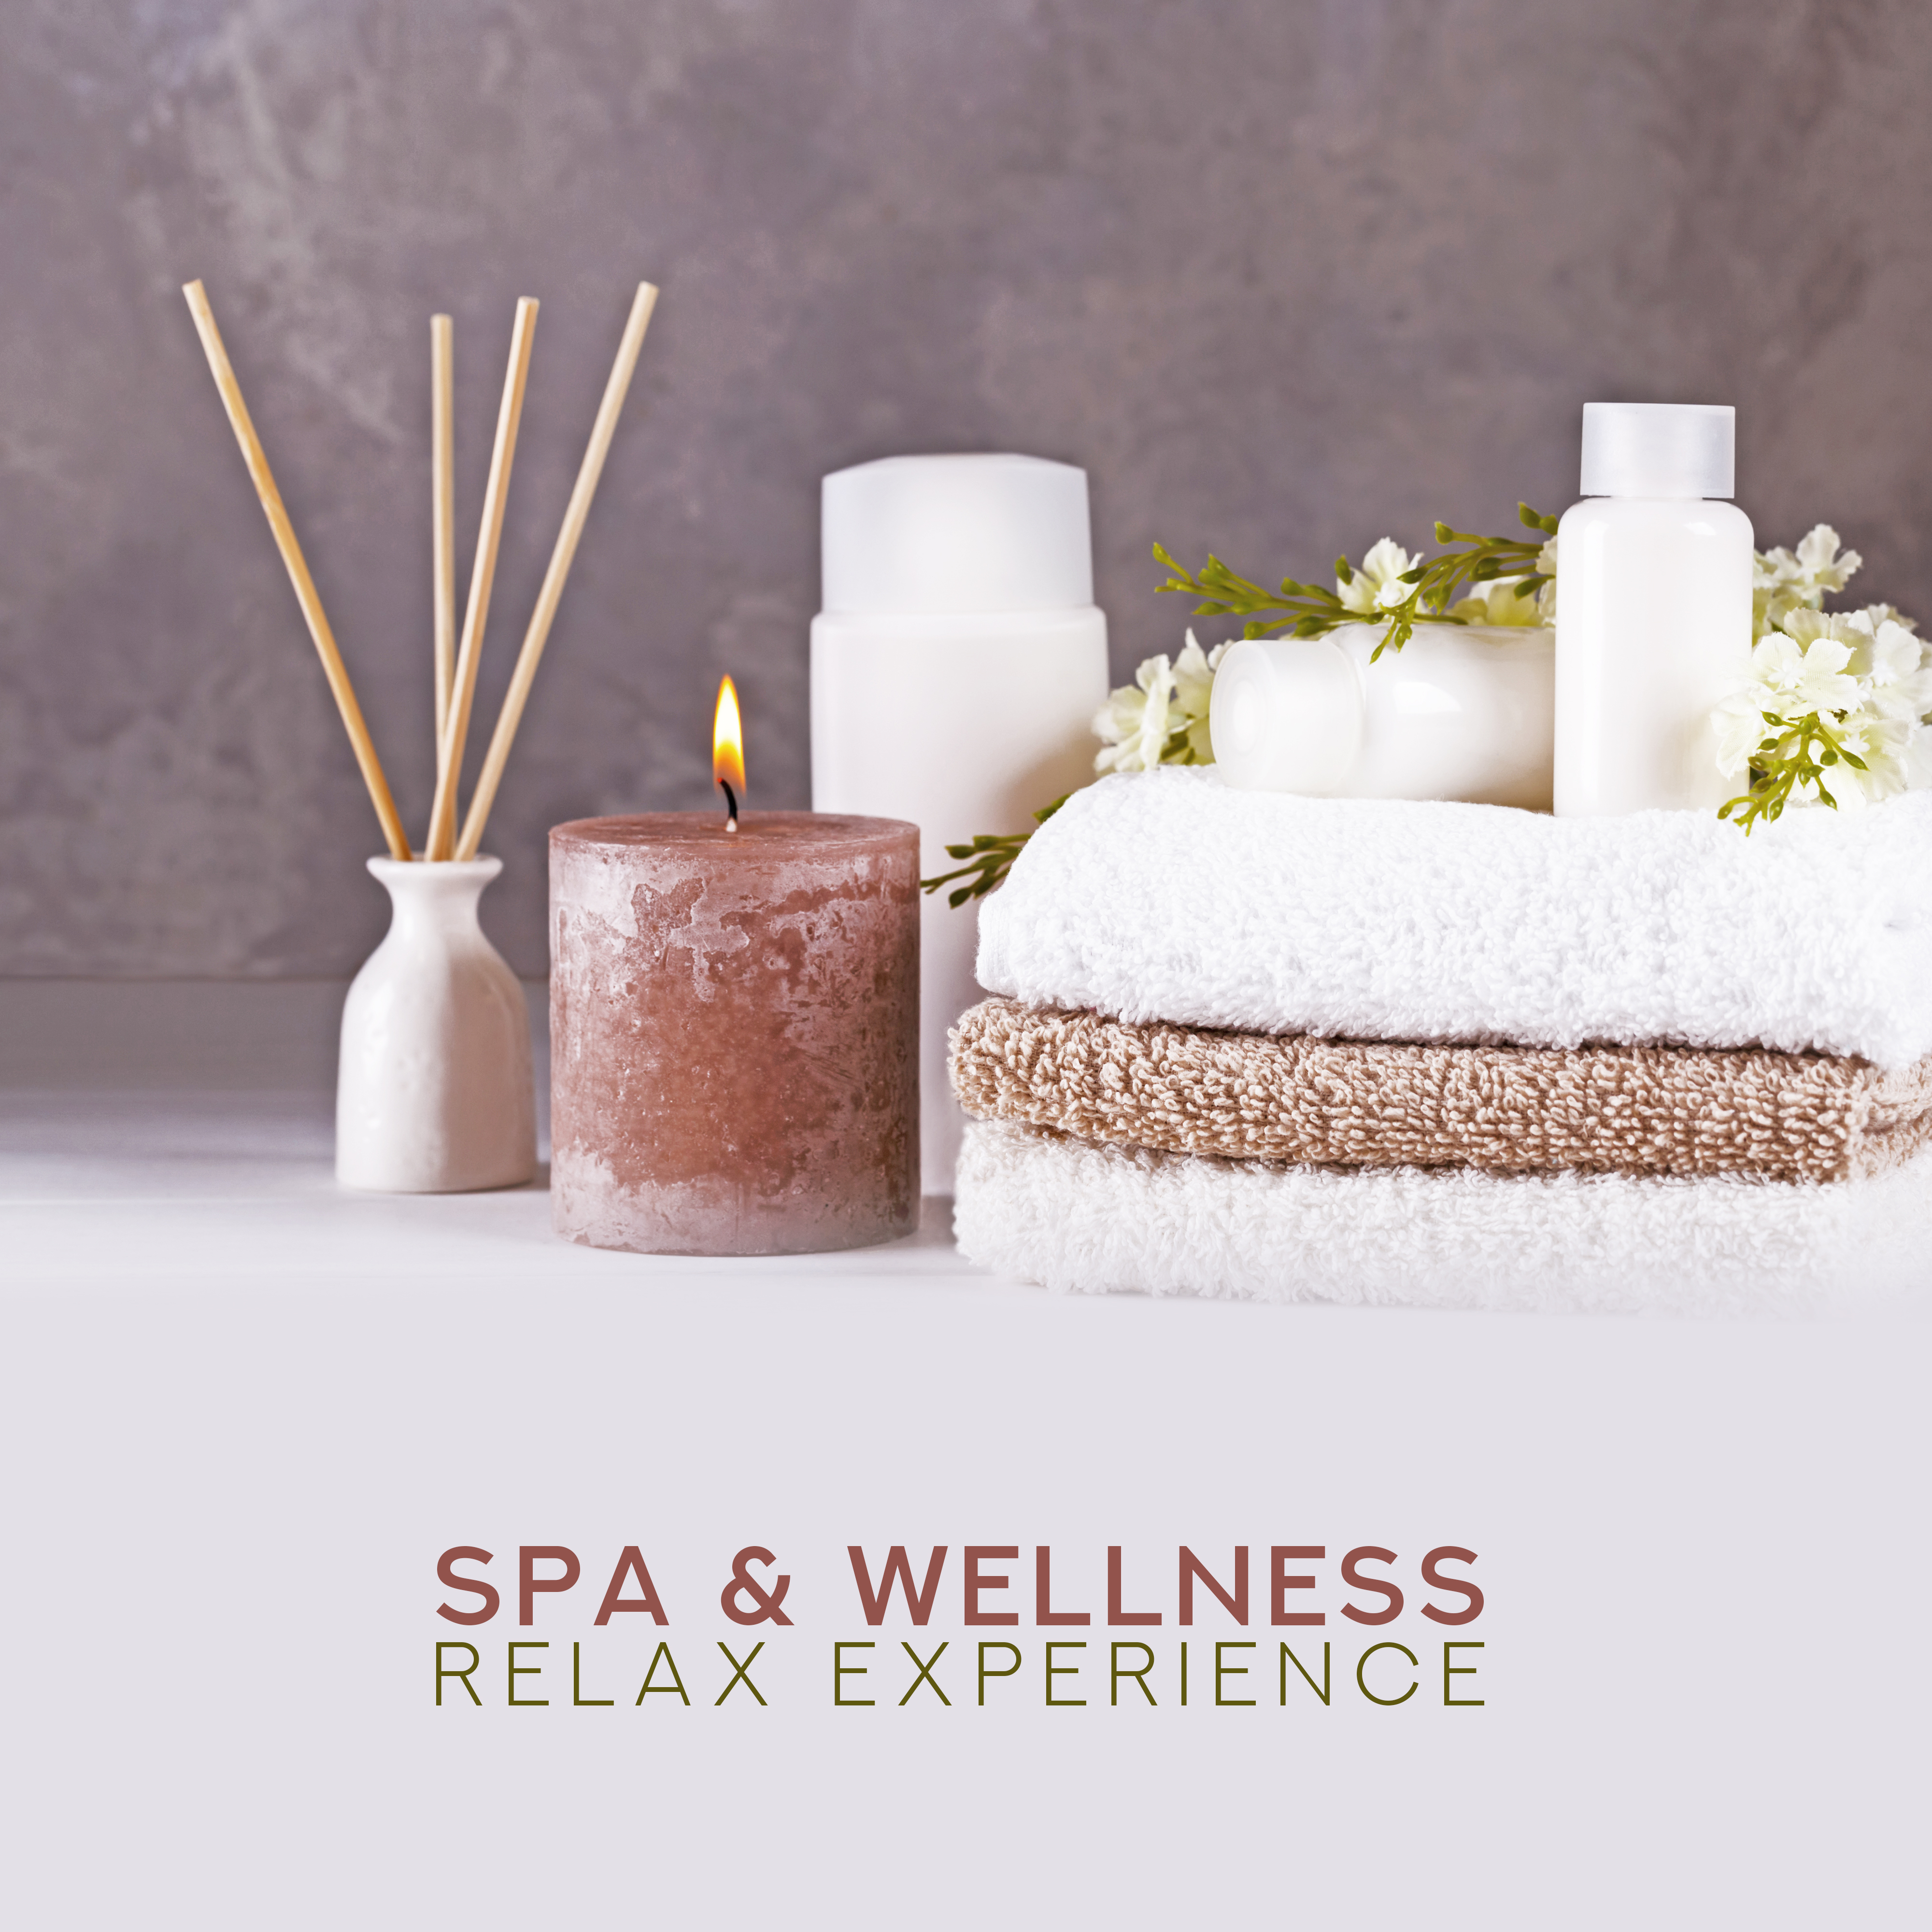 Spa & Wellness Relax Experience – New Age Gentle Touch Massage Music, Zen Spa Soothing Atmosphere, Divine Relax